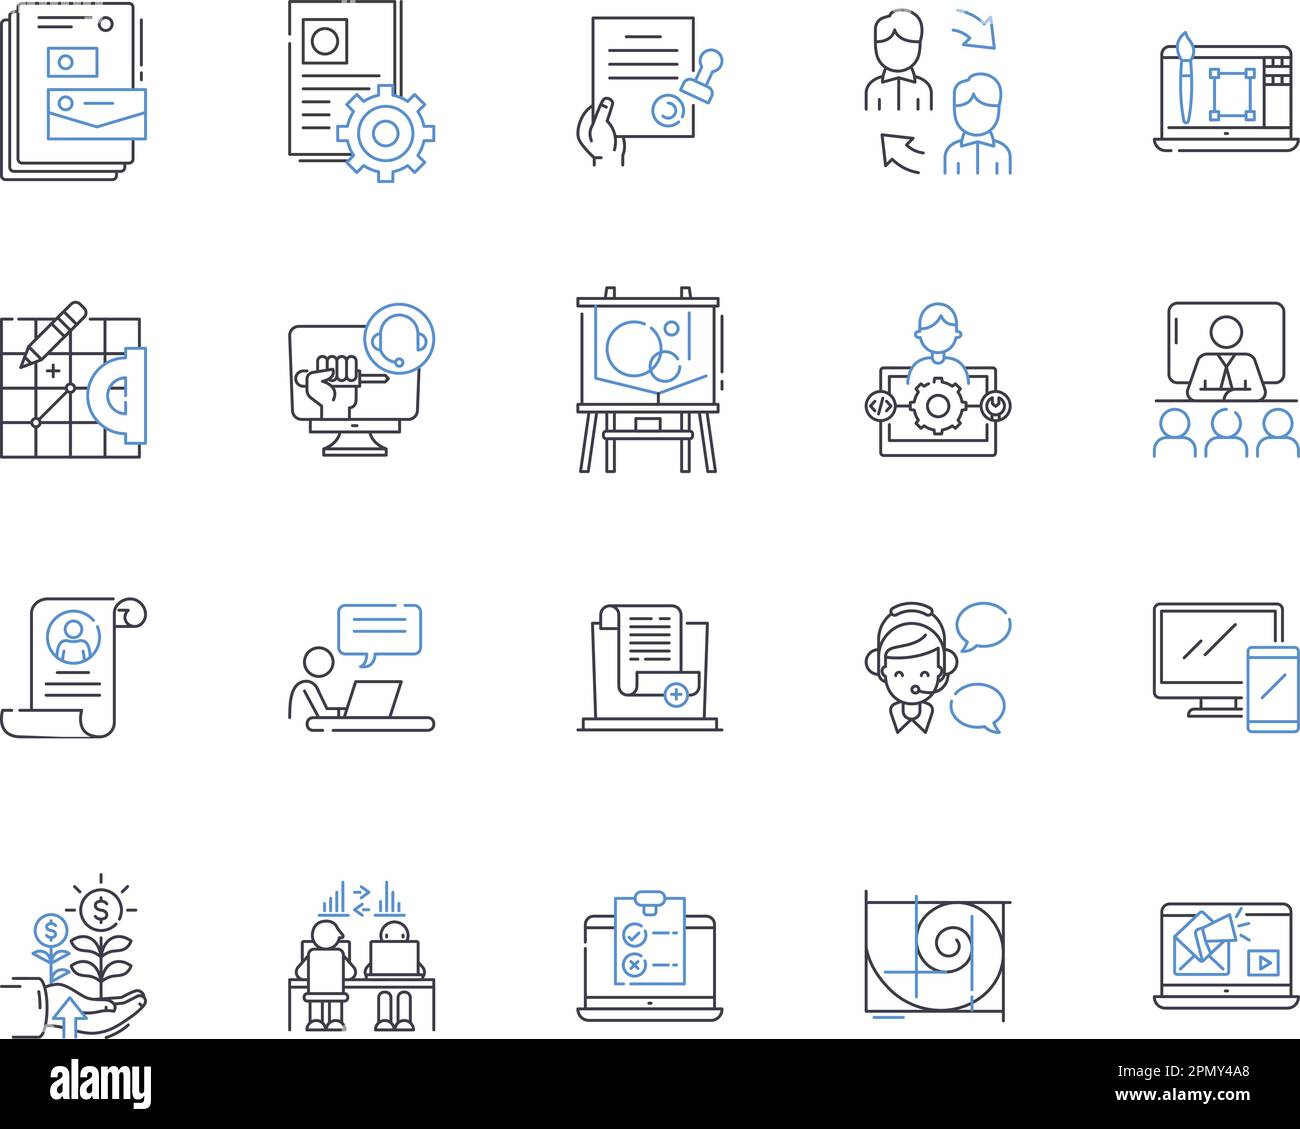 Company seminar outline icons collection. company, seminar, training, development, leadership, management, strategy vector and illustration concept Stock Vector